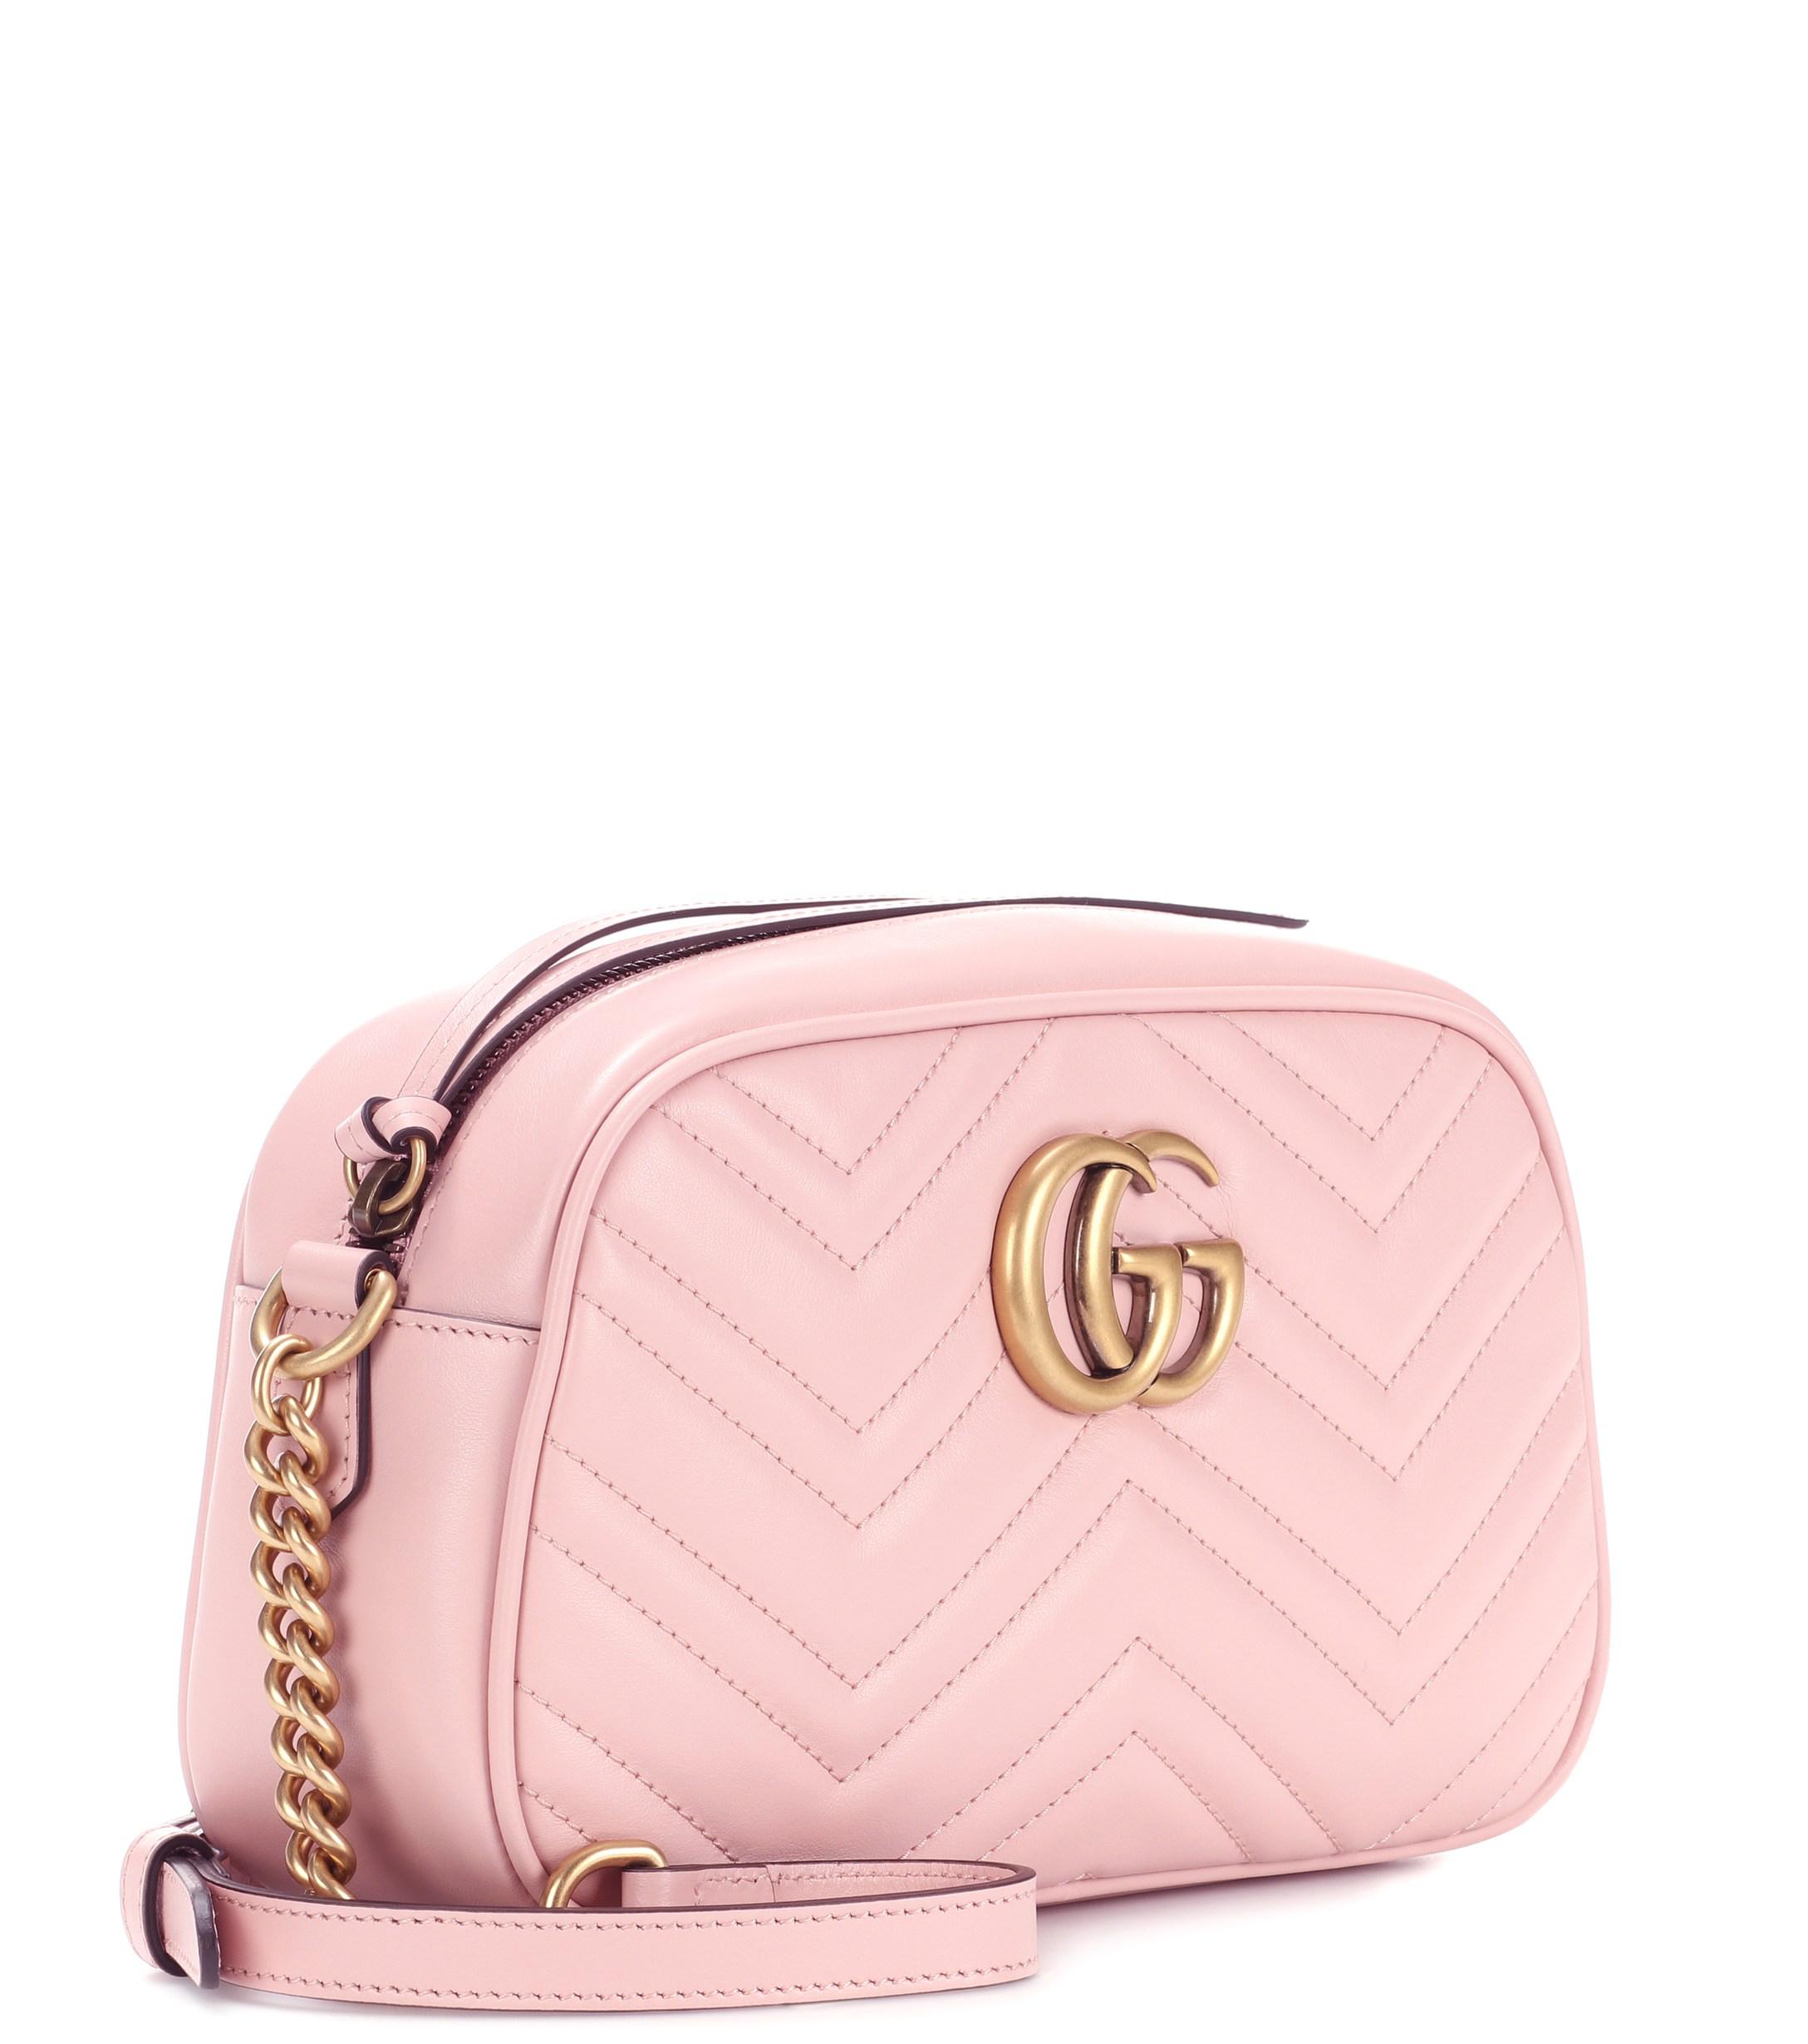 Gucci GG Marmont Leather Crossbody Bag in Pink - Lyst